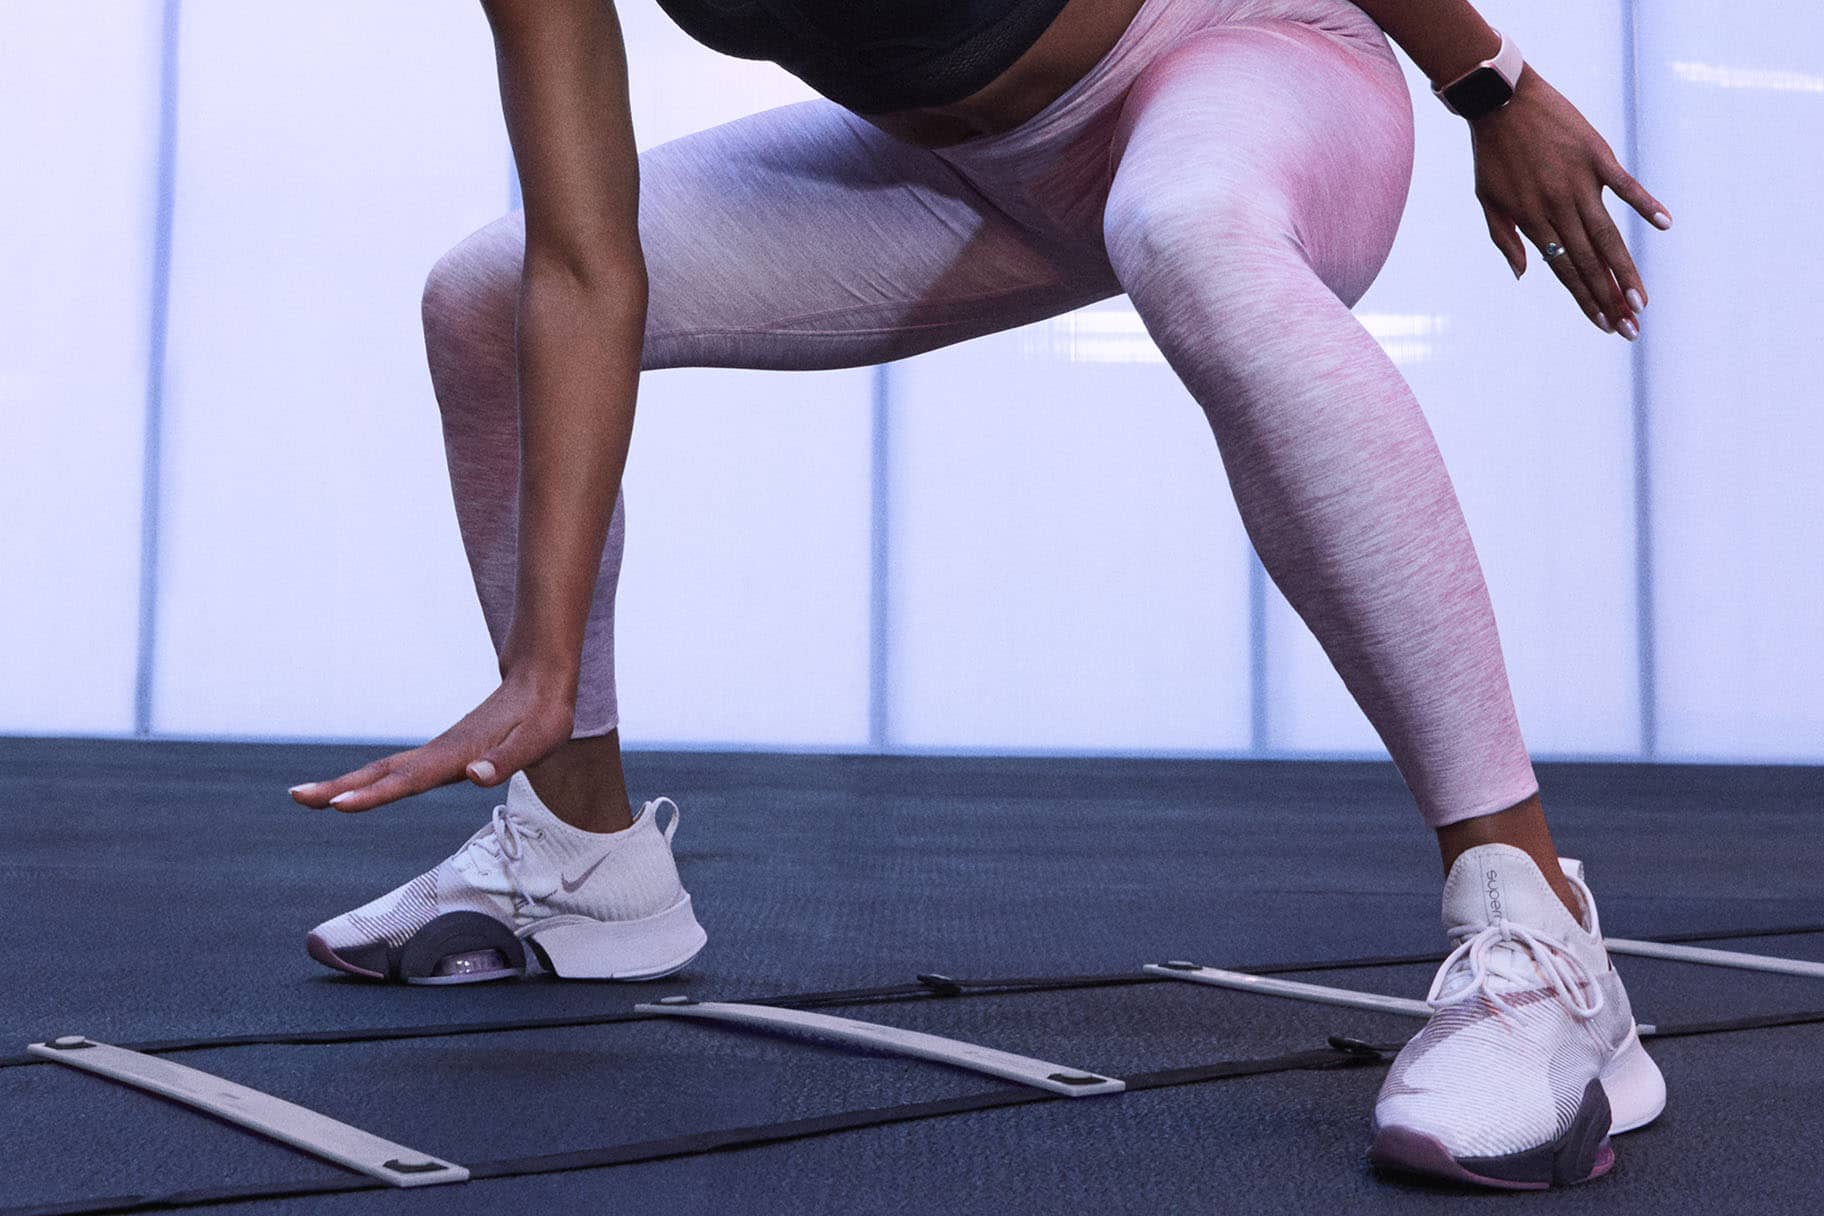 What Are Nike's Best Shoes for Squats?